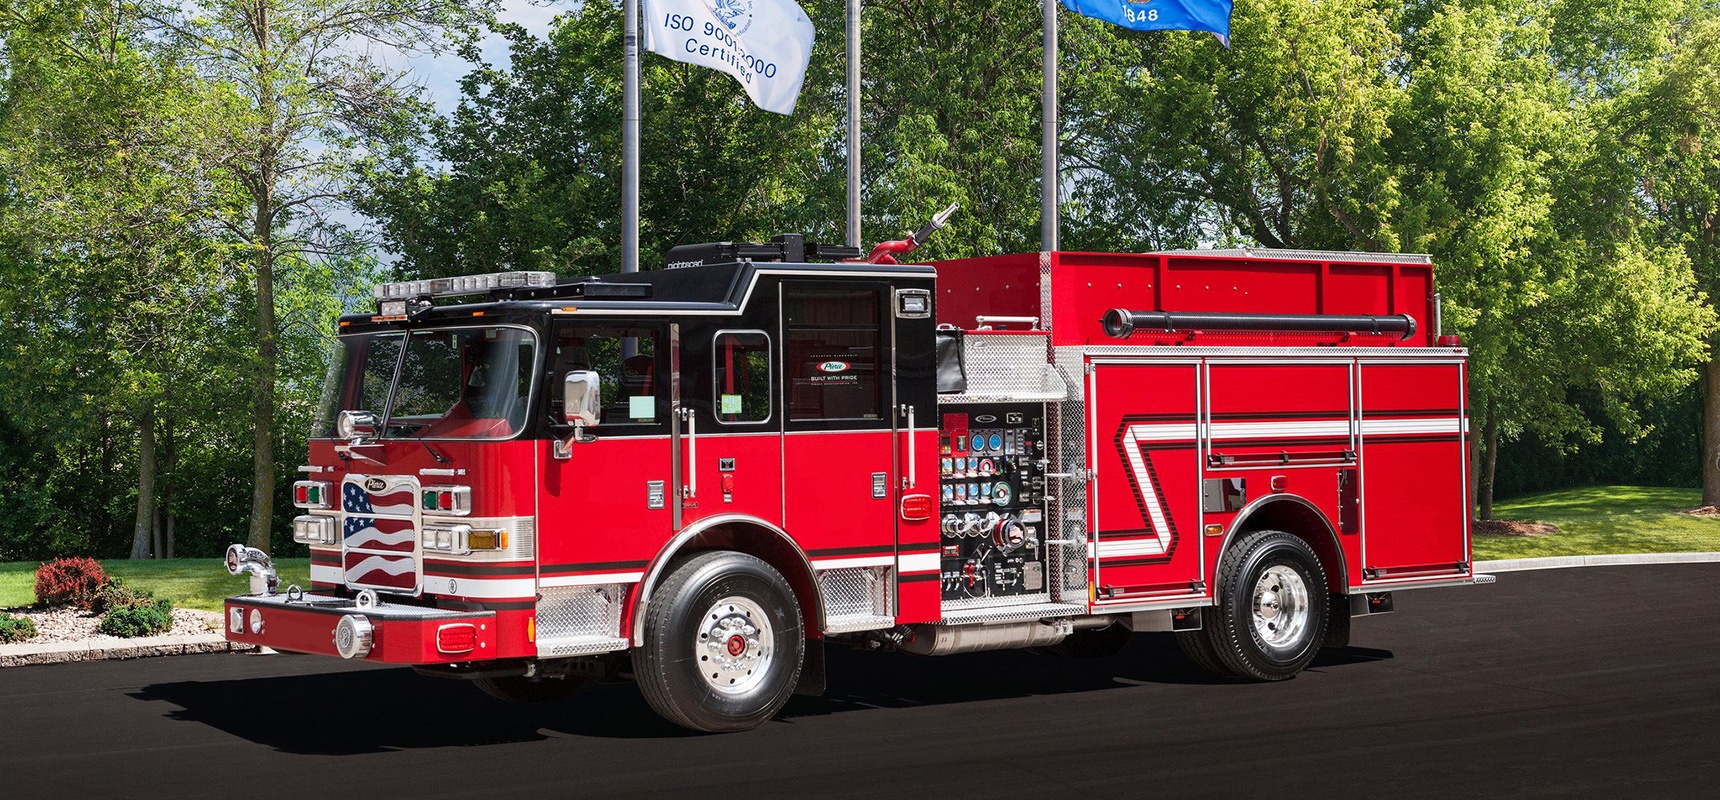 Four-Pierce-Arrow-XT-Pumpers-Sold-to-Gwinnett-County-Fire-and-Emergency-Services-in-Georgia_Header.jpg